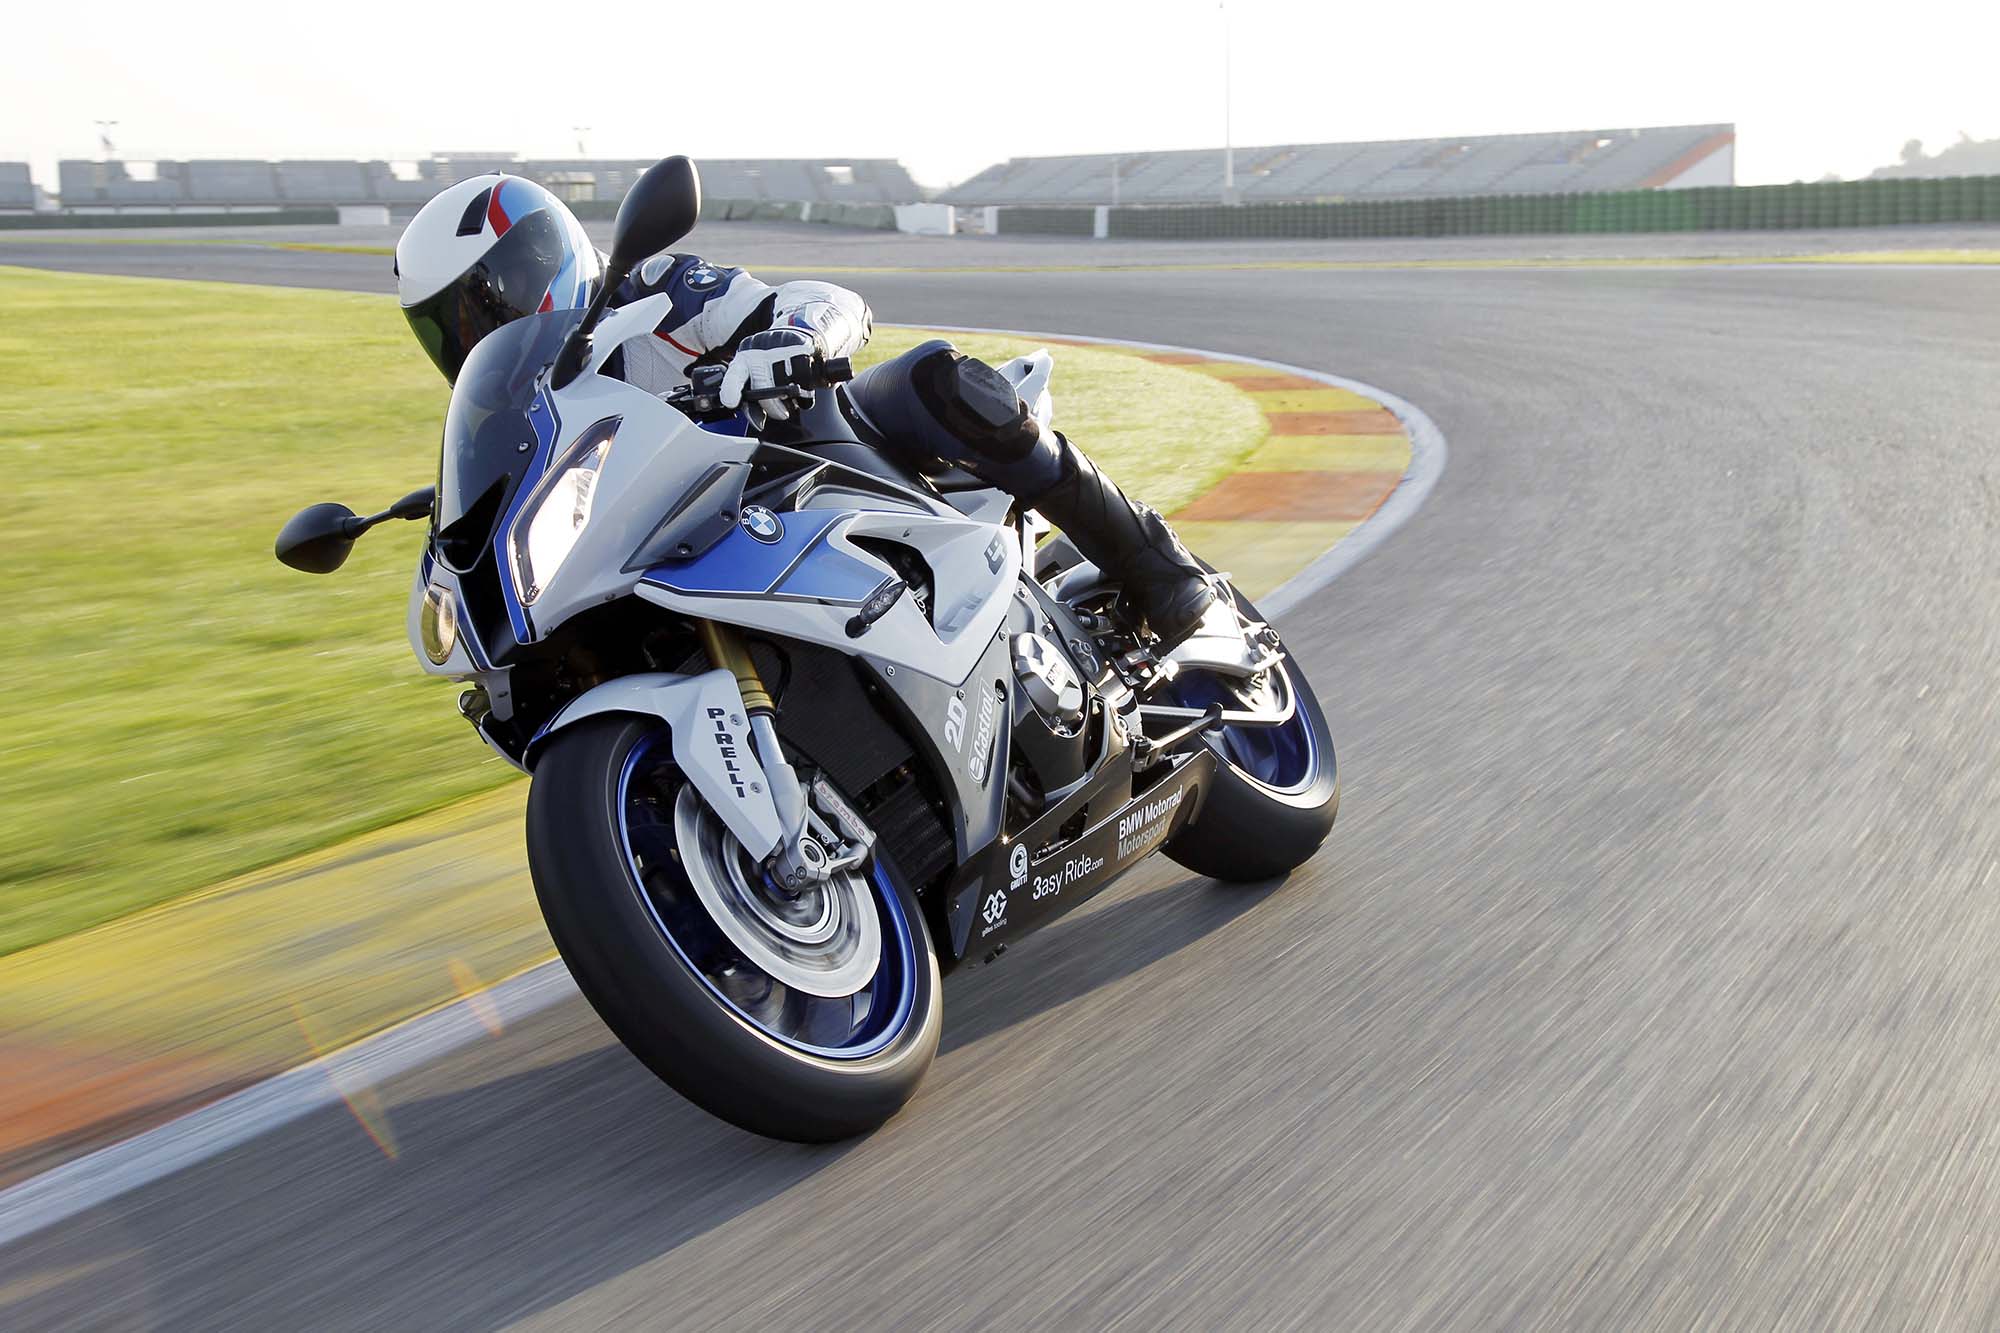 Sx-Z | BMW HP4 Based On The S 1000 RR